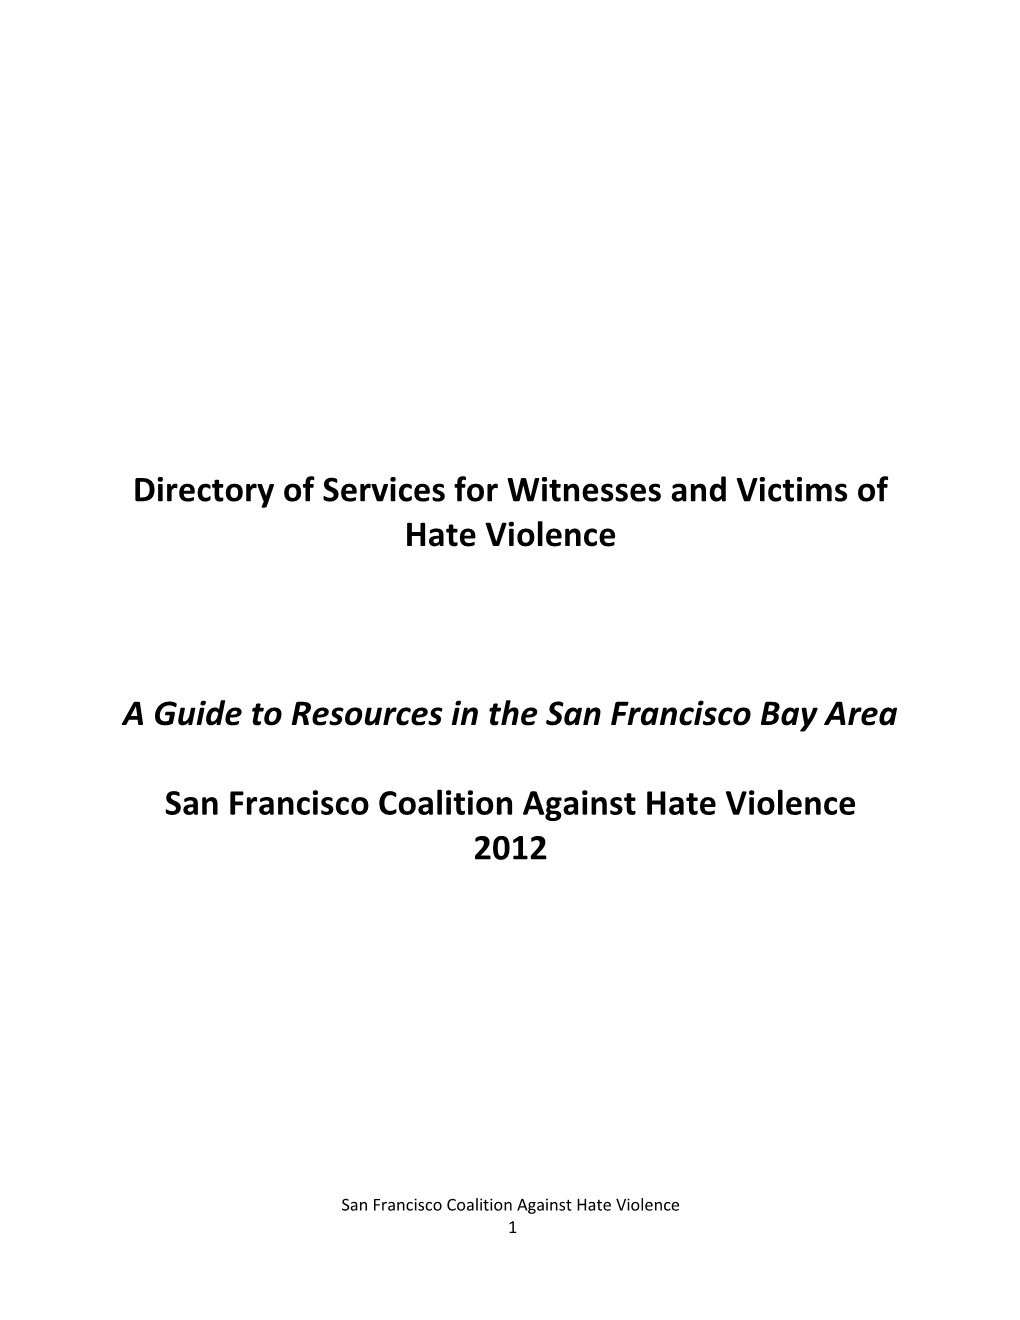 Directory of Services for Witnesses and Victims of Hate Violence